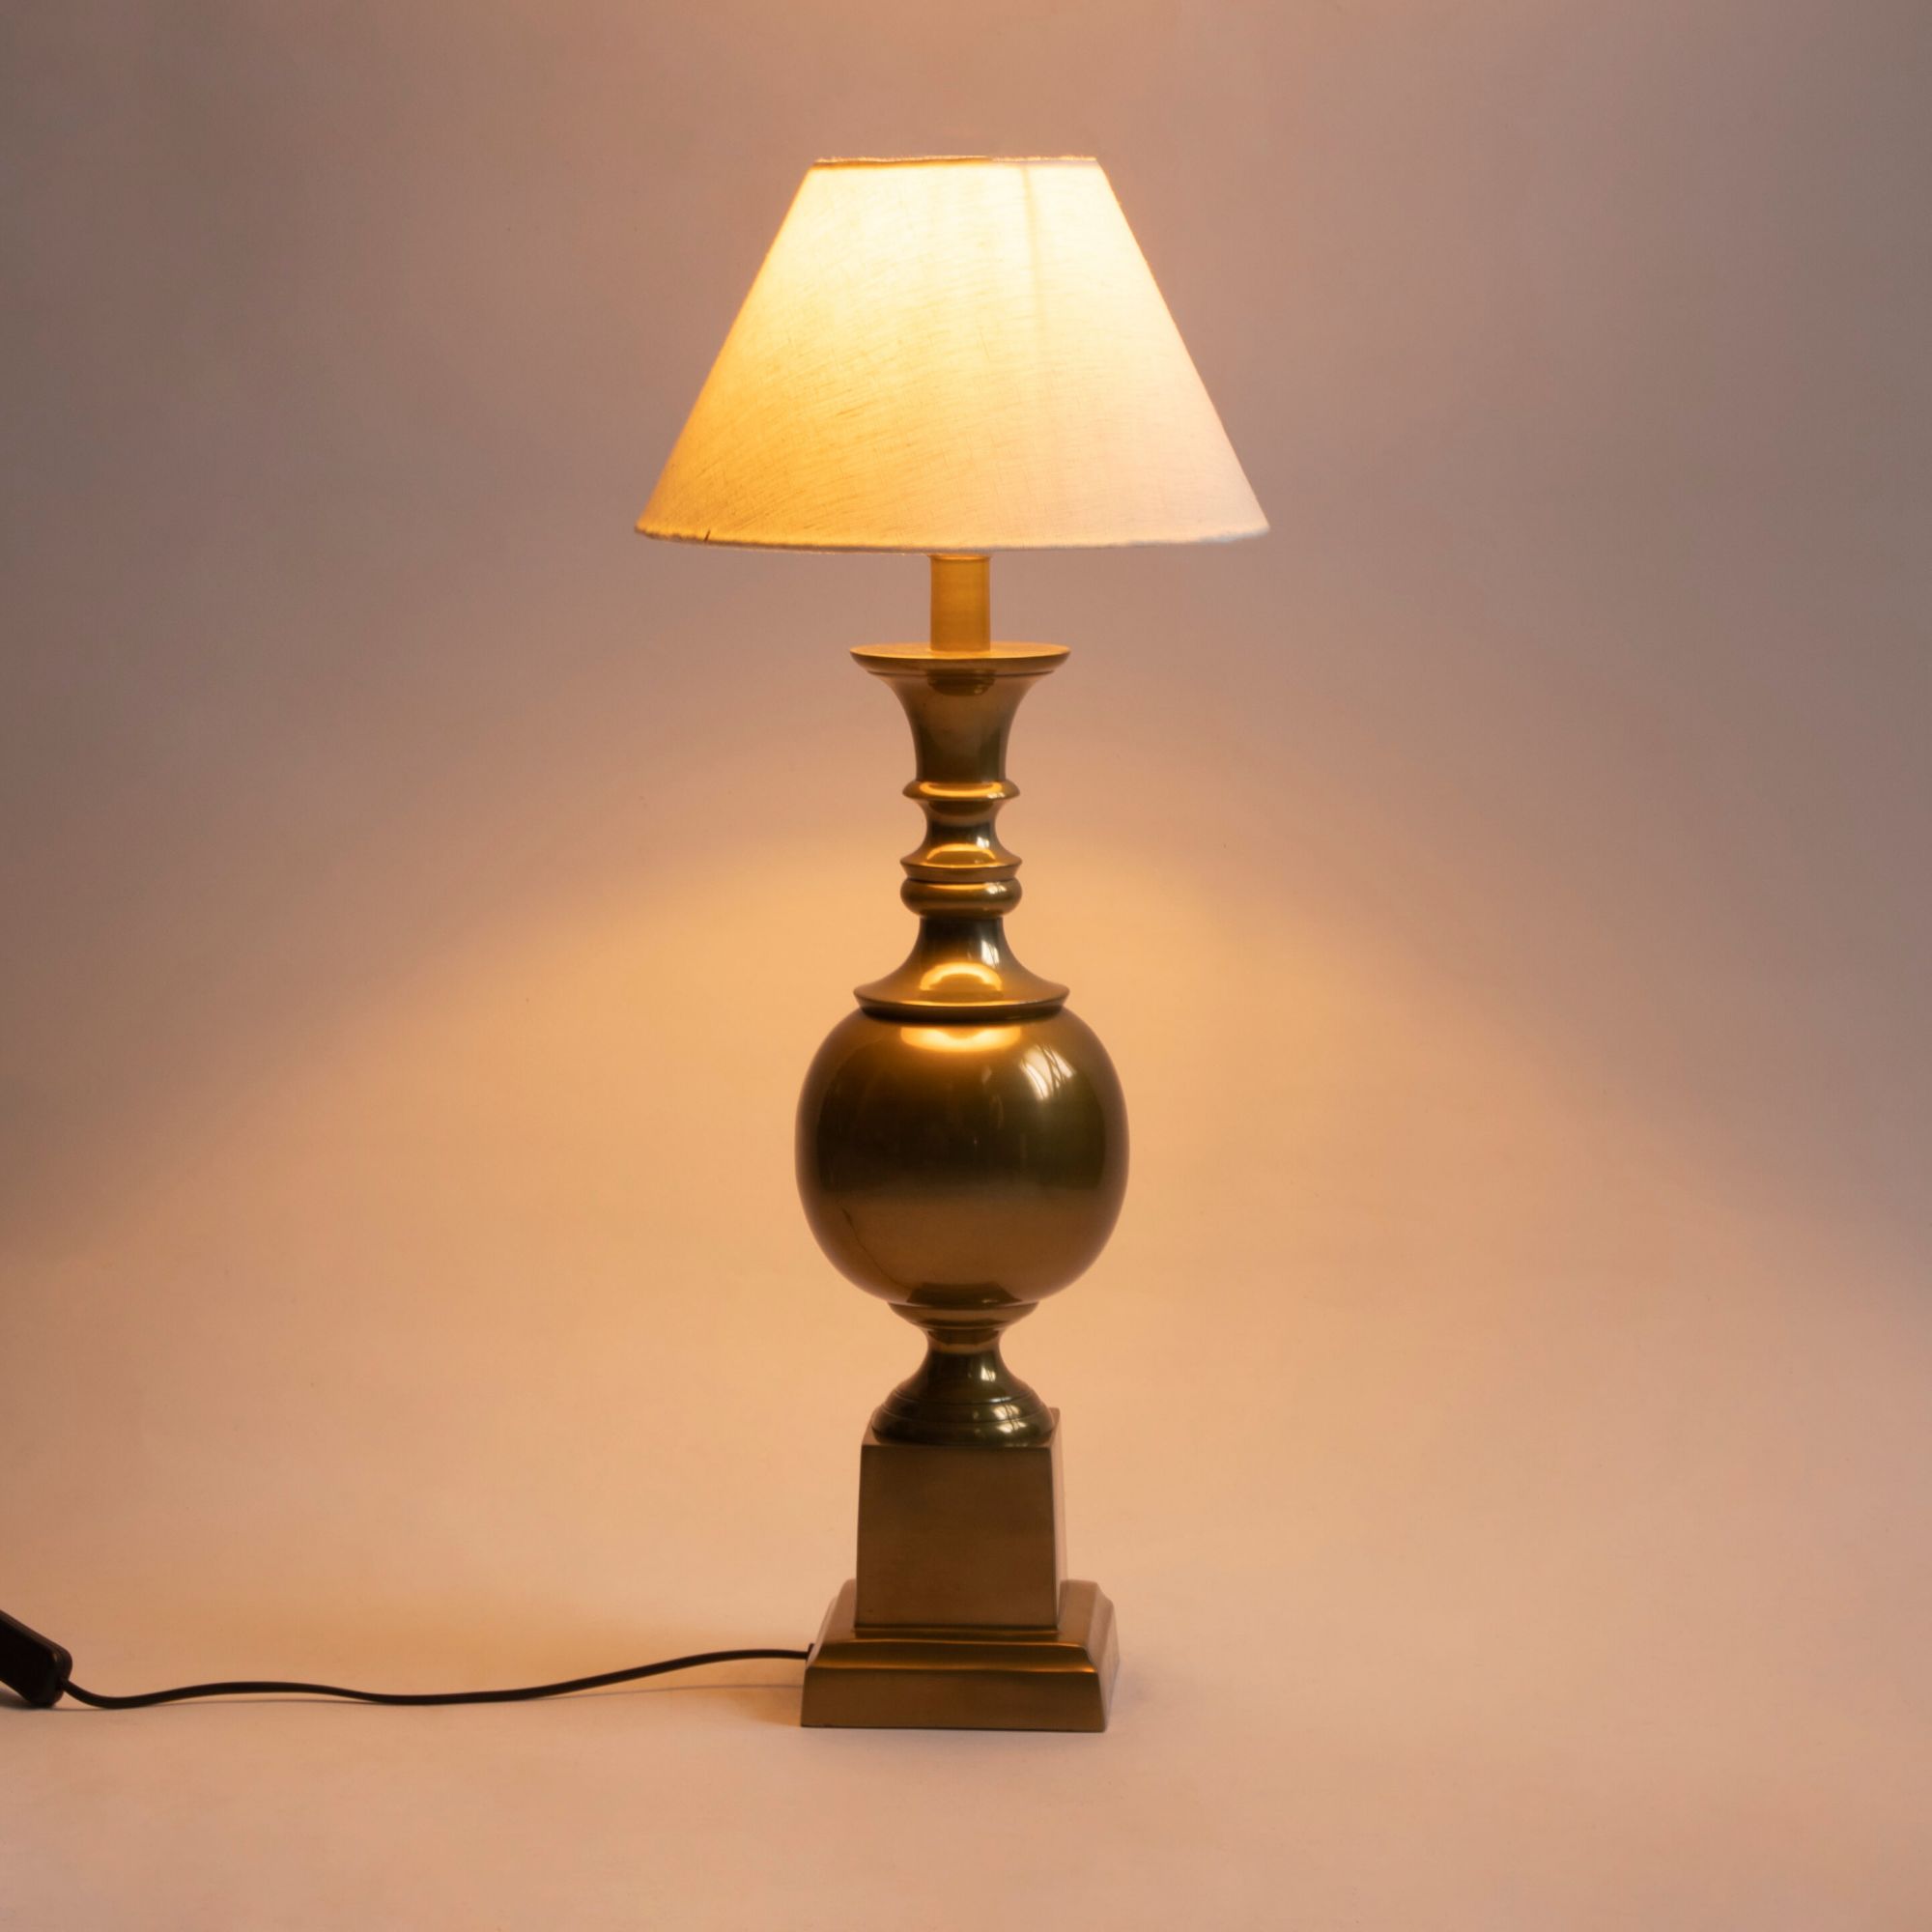 Buy Table Lamps For Home Decor Online India